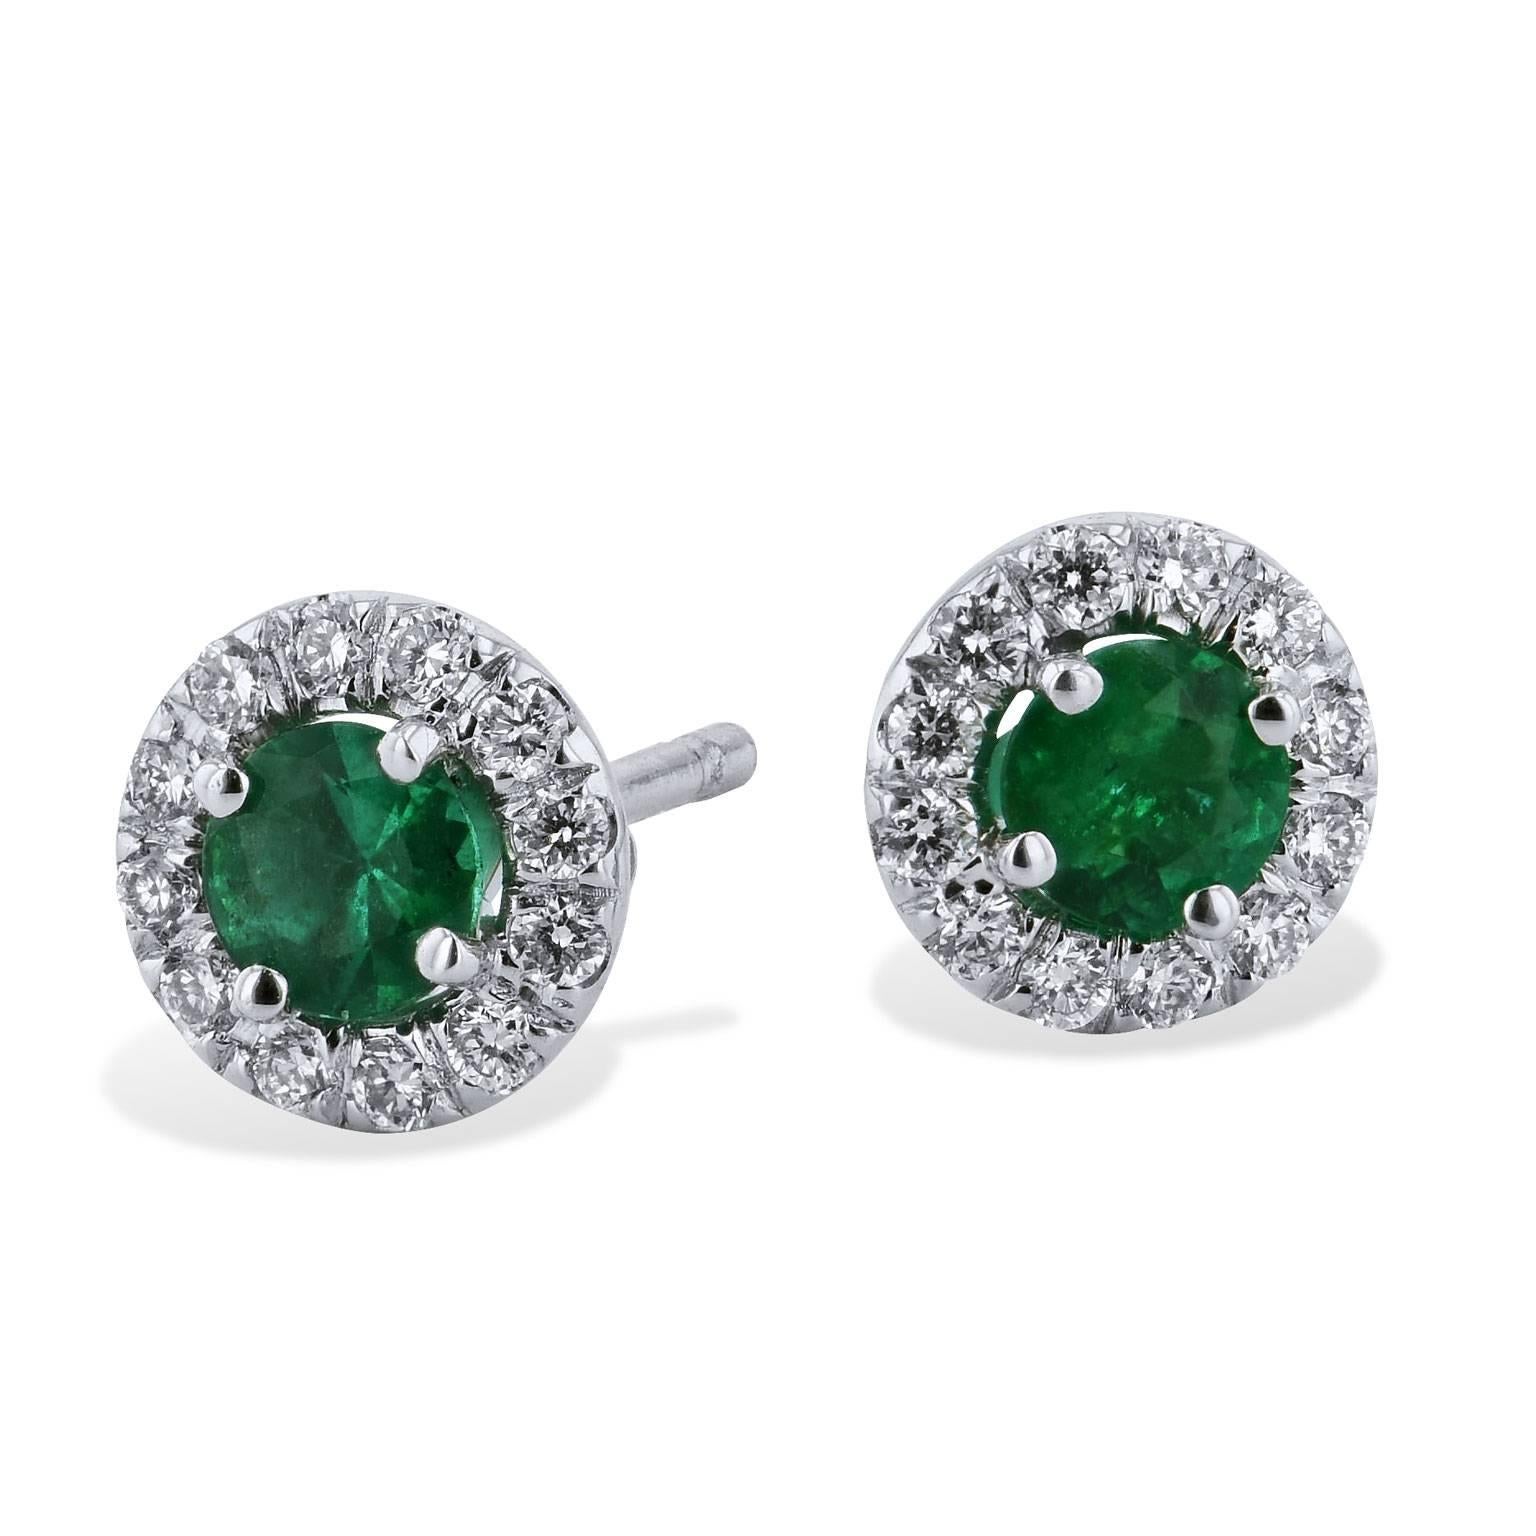 A sea of emerald green stirs with enchantment in these handmade 18 karat white gold 0.34 carat emerald stud earrings featuring 0.18 carat of pave-set diamond (G/H/VS/SI1).